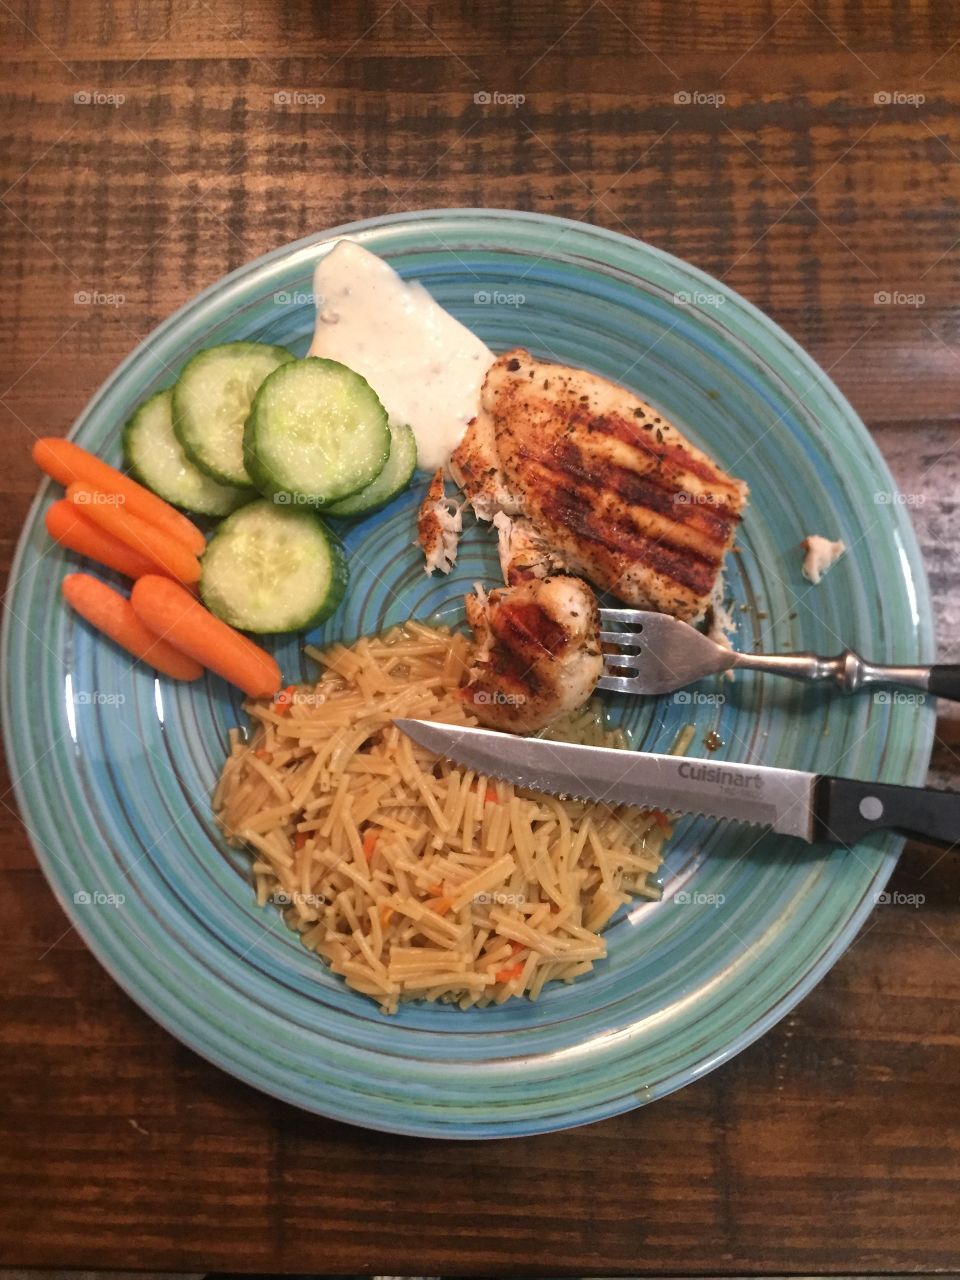 Blackened chicken ,honey garlic noodles add some raw  vegetables .A healthy meal made eye appealing and  delicious in just 20 minutes perfect for those late evenings 